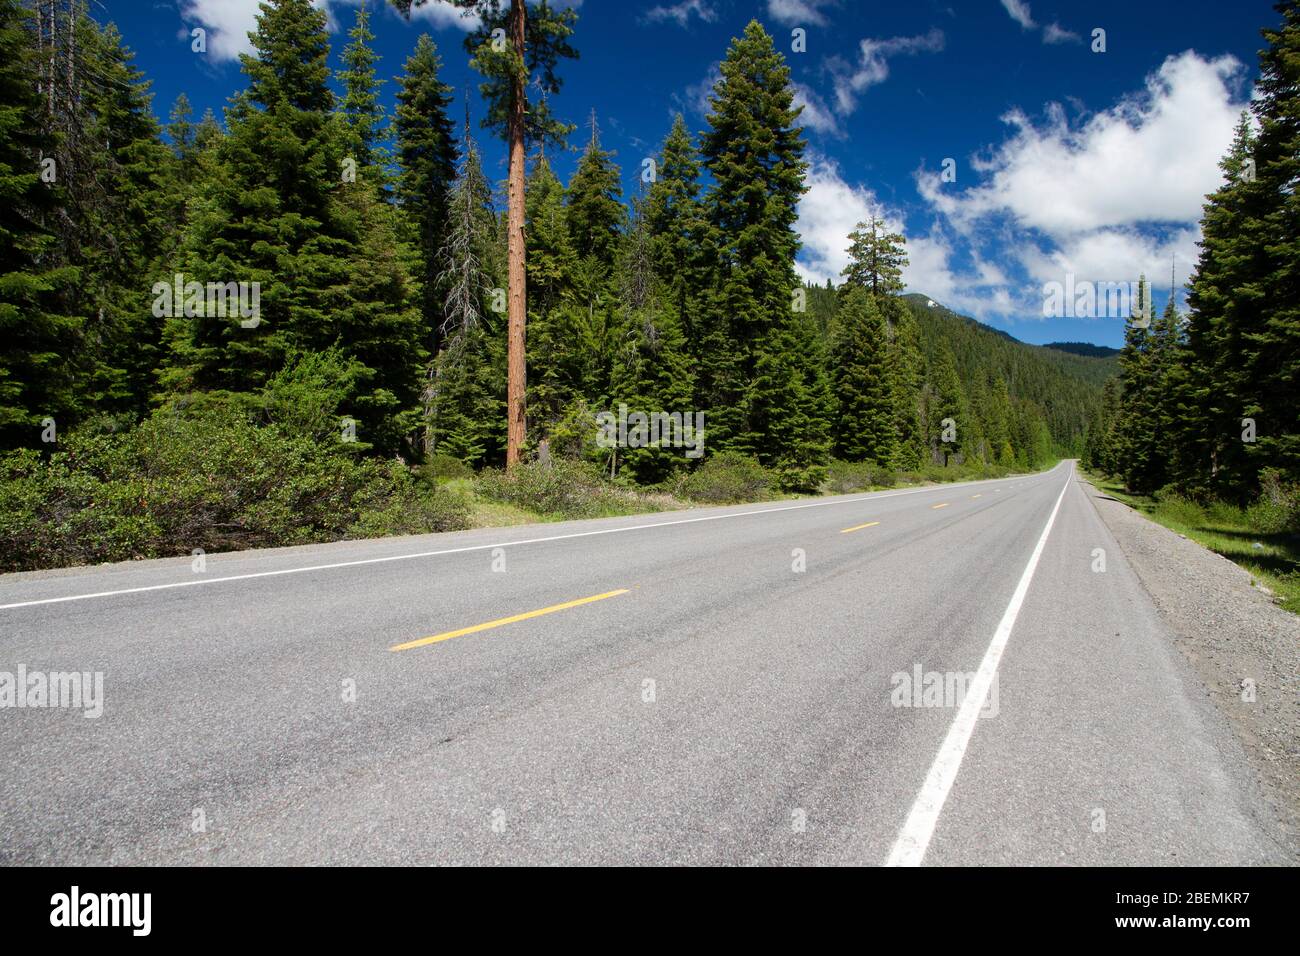 View looking up a forested highway, West Side Road (County 531, Volcanic Legacy Highway) in Klamath County, southern Oregon Cascades Stock Photo